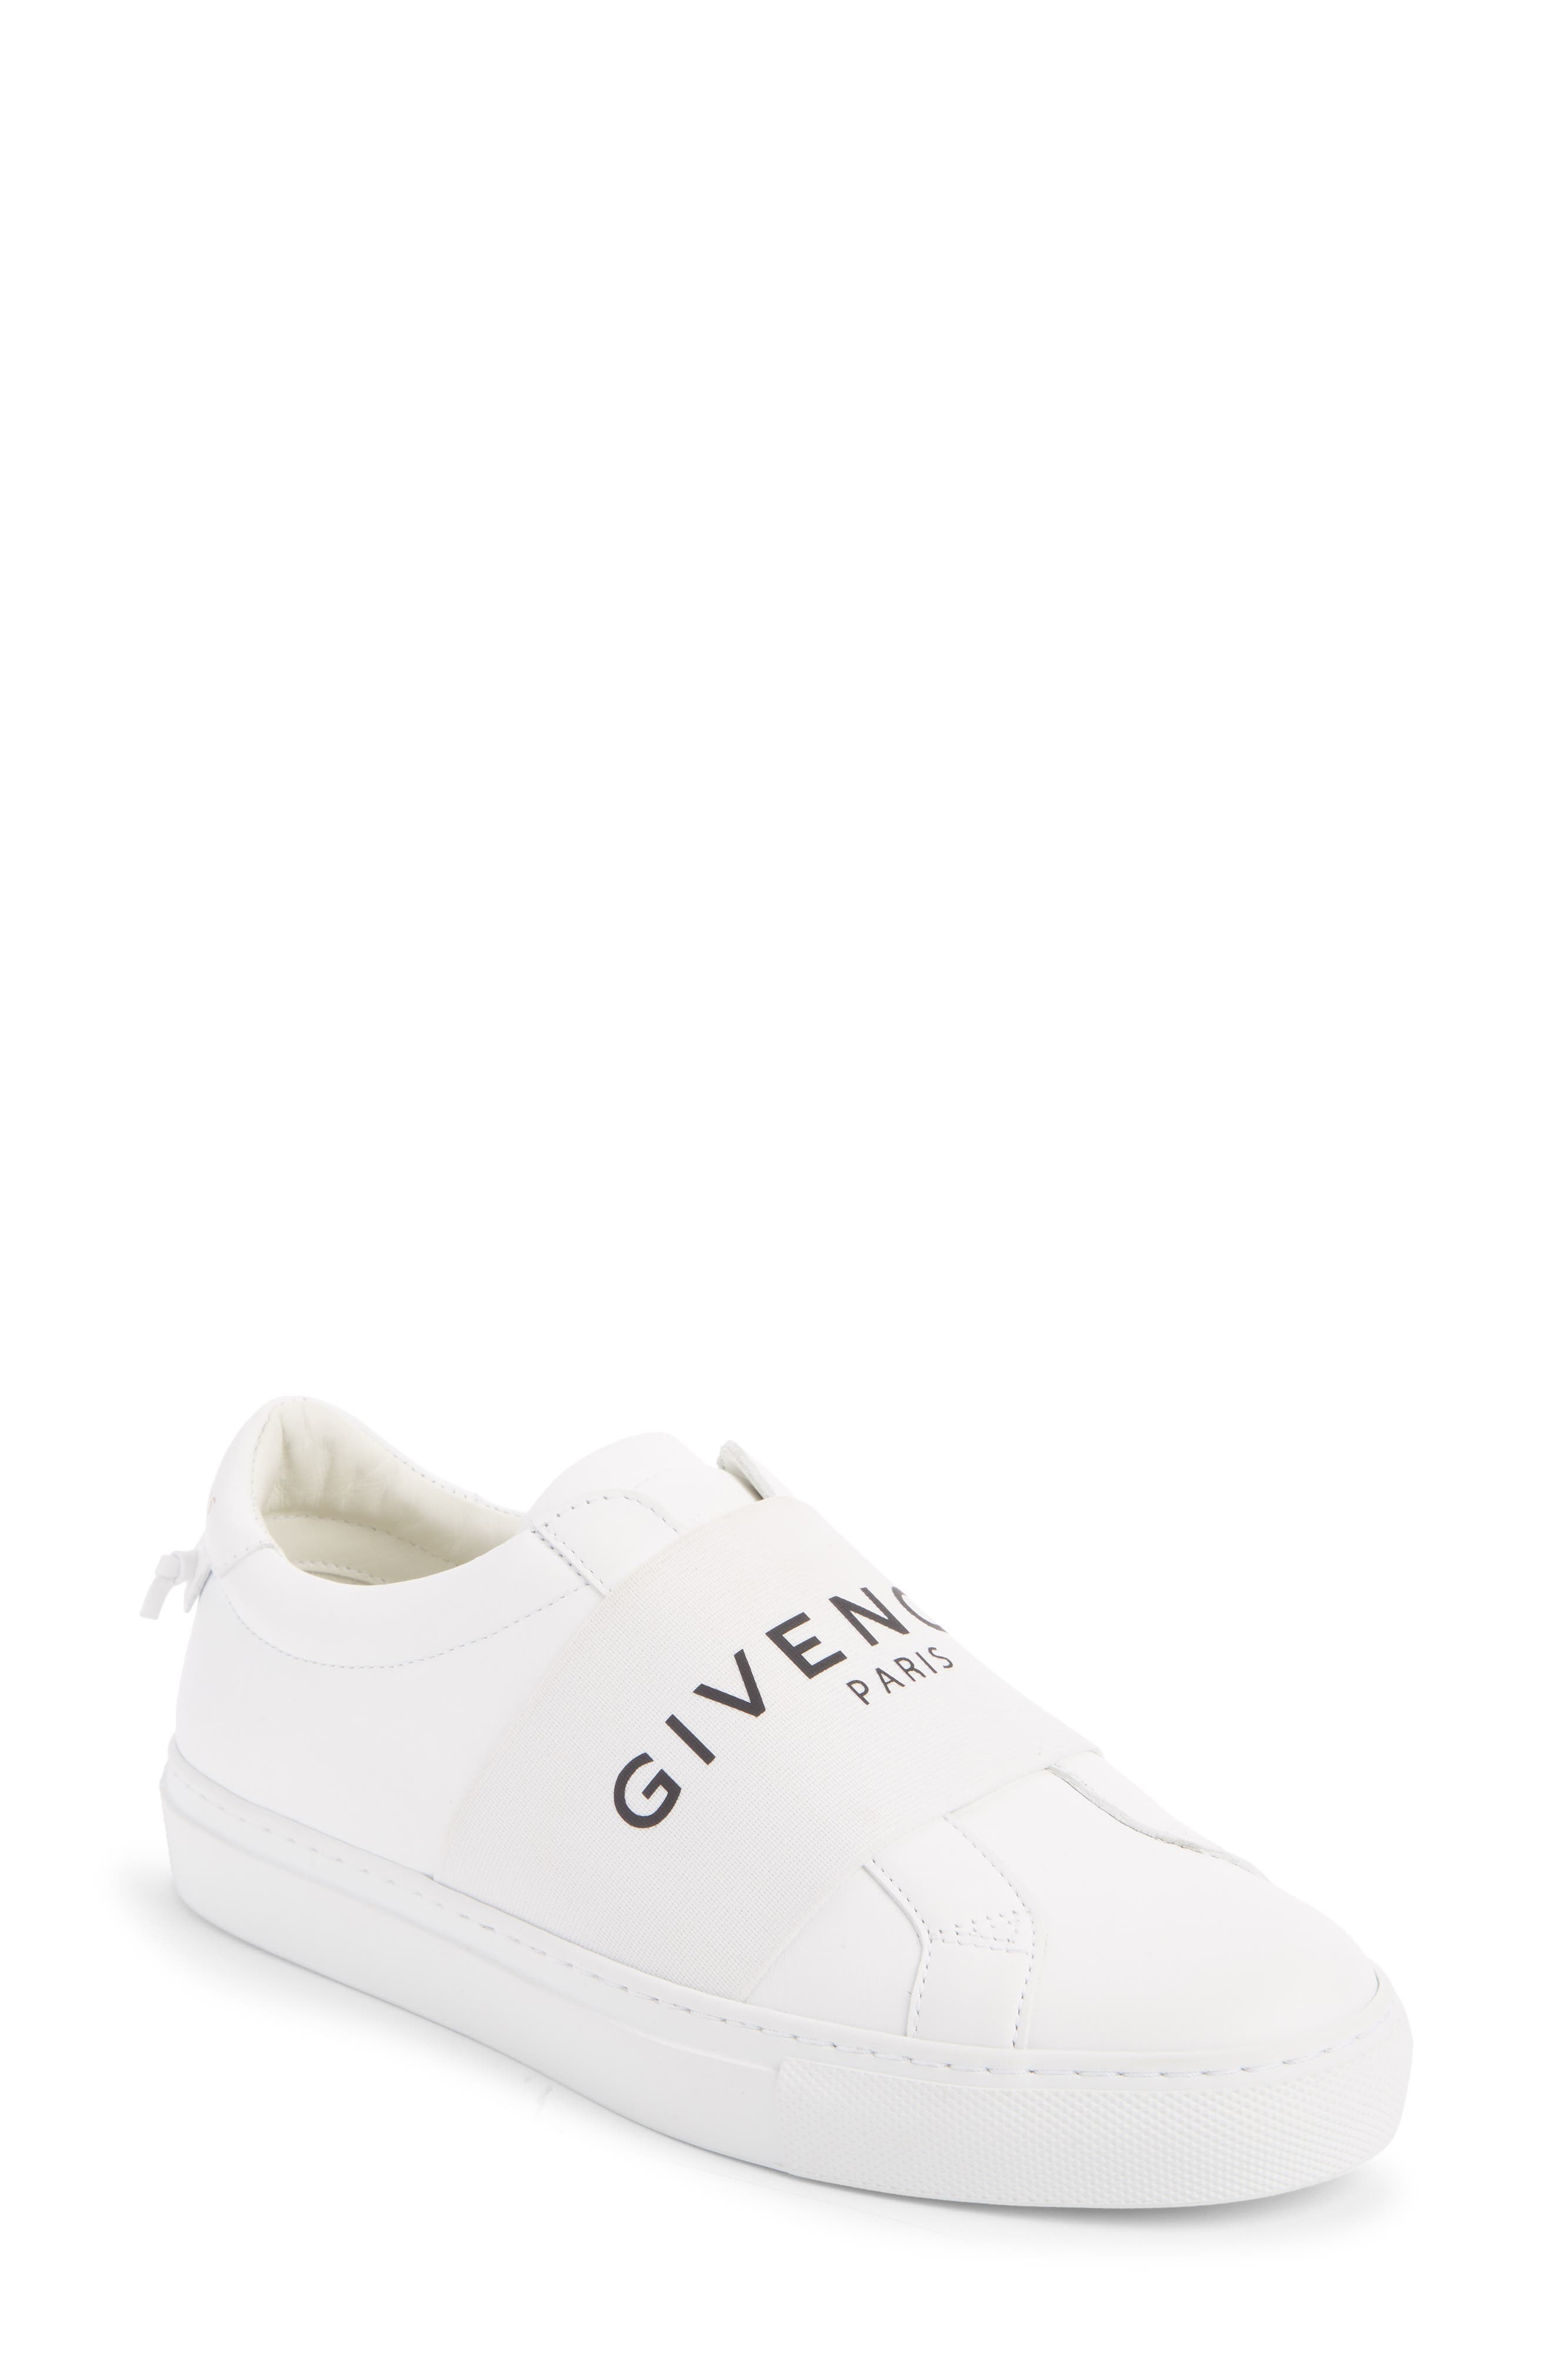 pink givenchy shoes